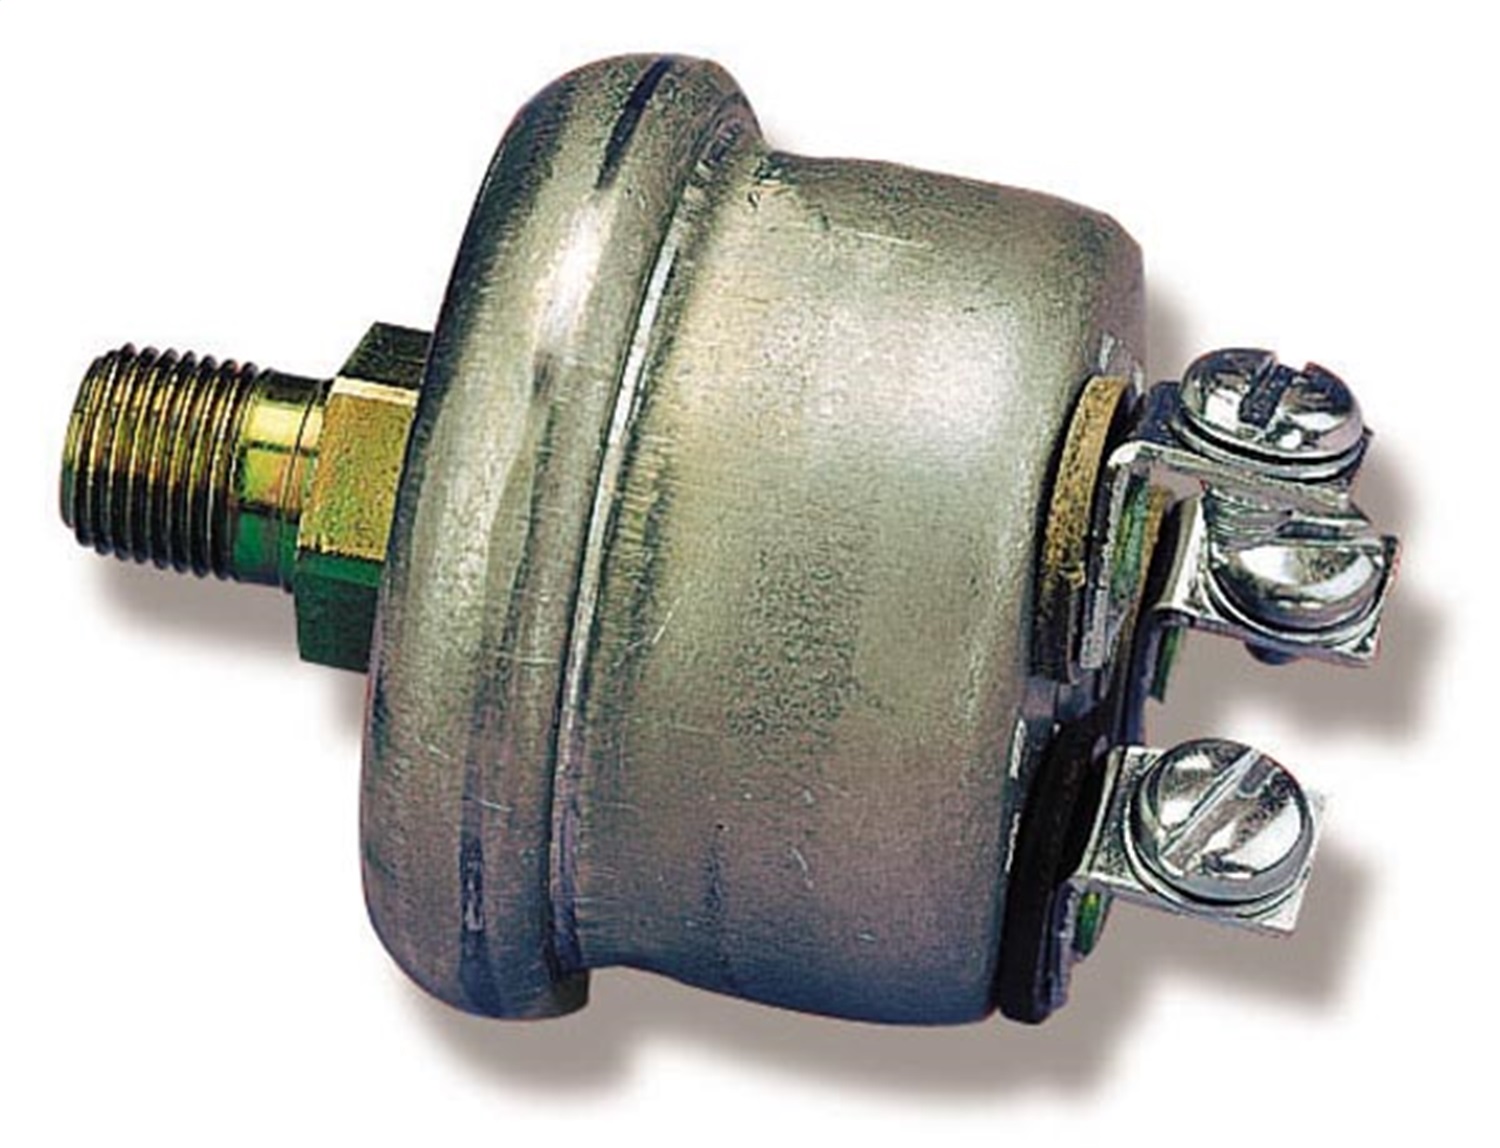 Holley Performance Holley Performance 12-810 Fuel Pump Safety Pressure Switch